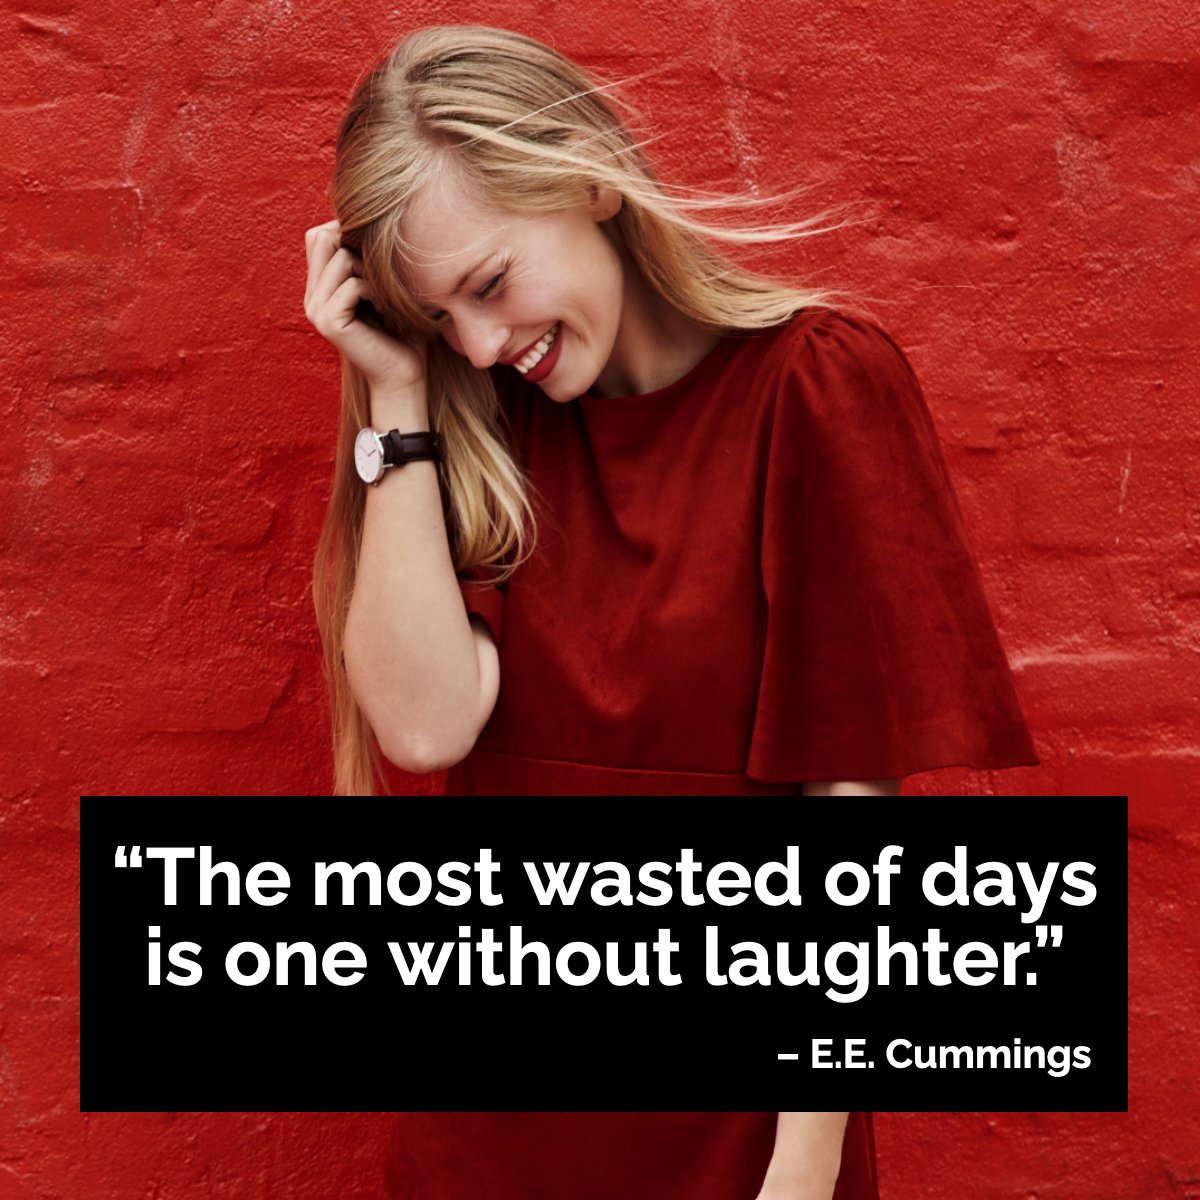 Laughter is one of the most valuable things in your life. 💯

#wisdomquote #wisdomoftheday #quotegram #quoteoftheday  #eecummings
 #L2LPOSTS